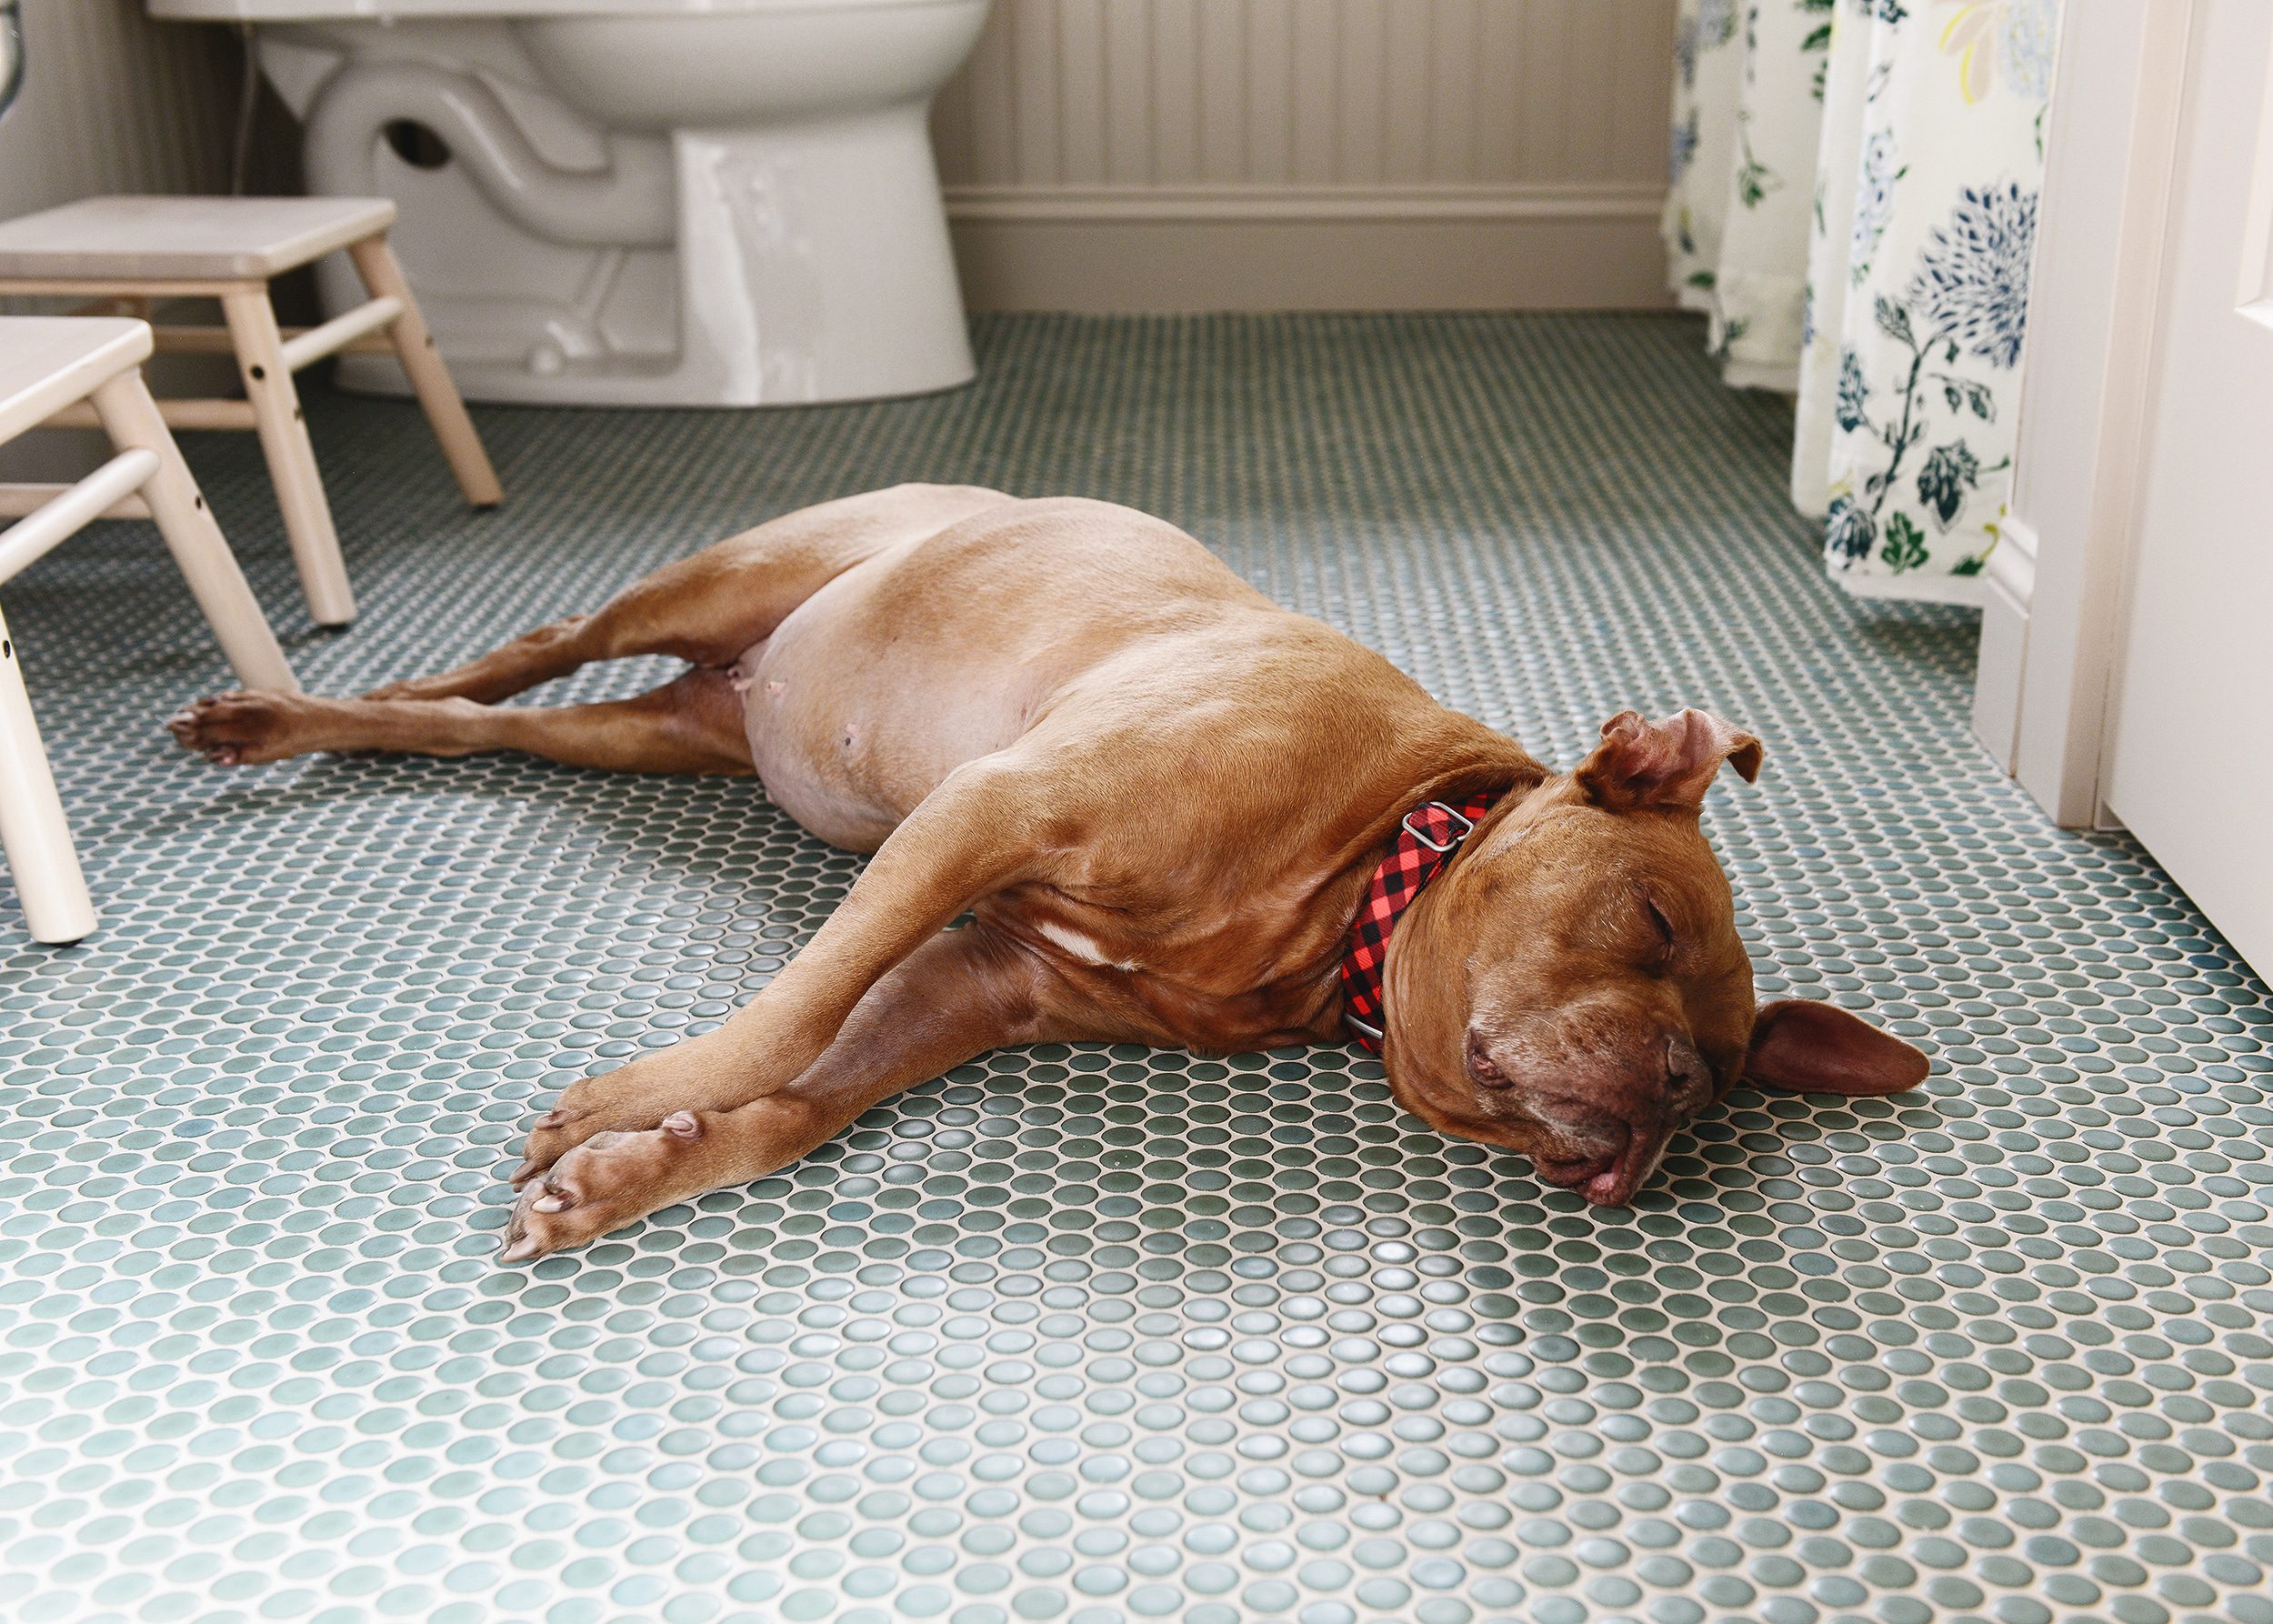 Our dog CC enjoying the heated floors in our bathroom remodel! | via Yellow Brick Home